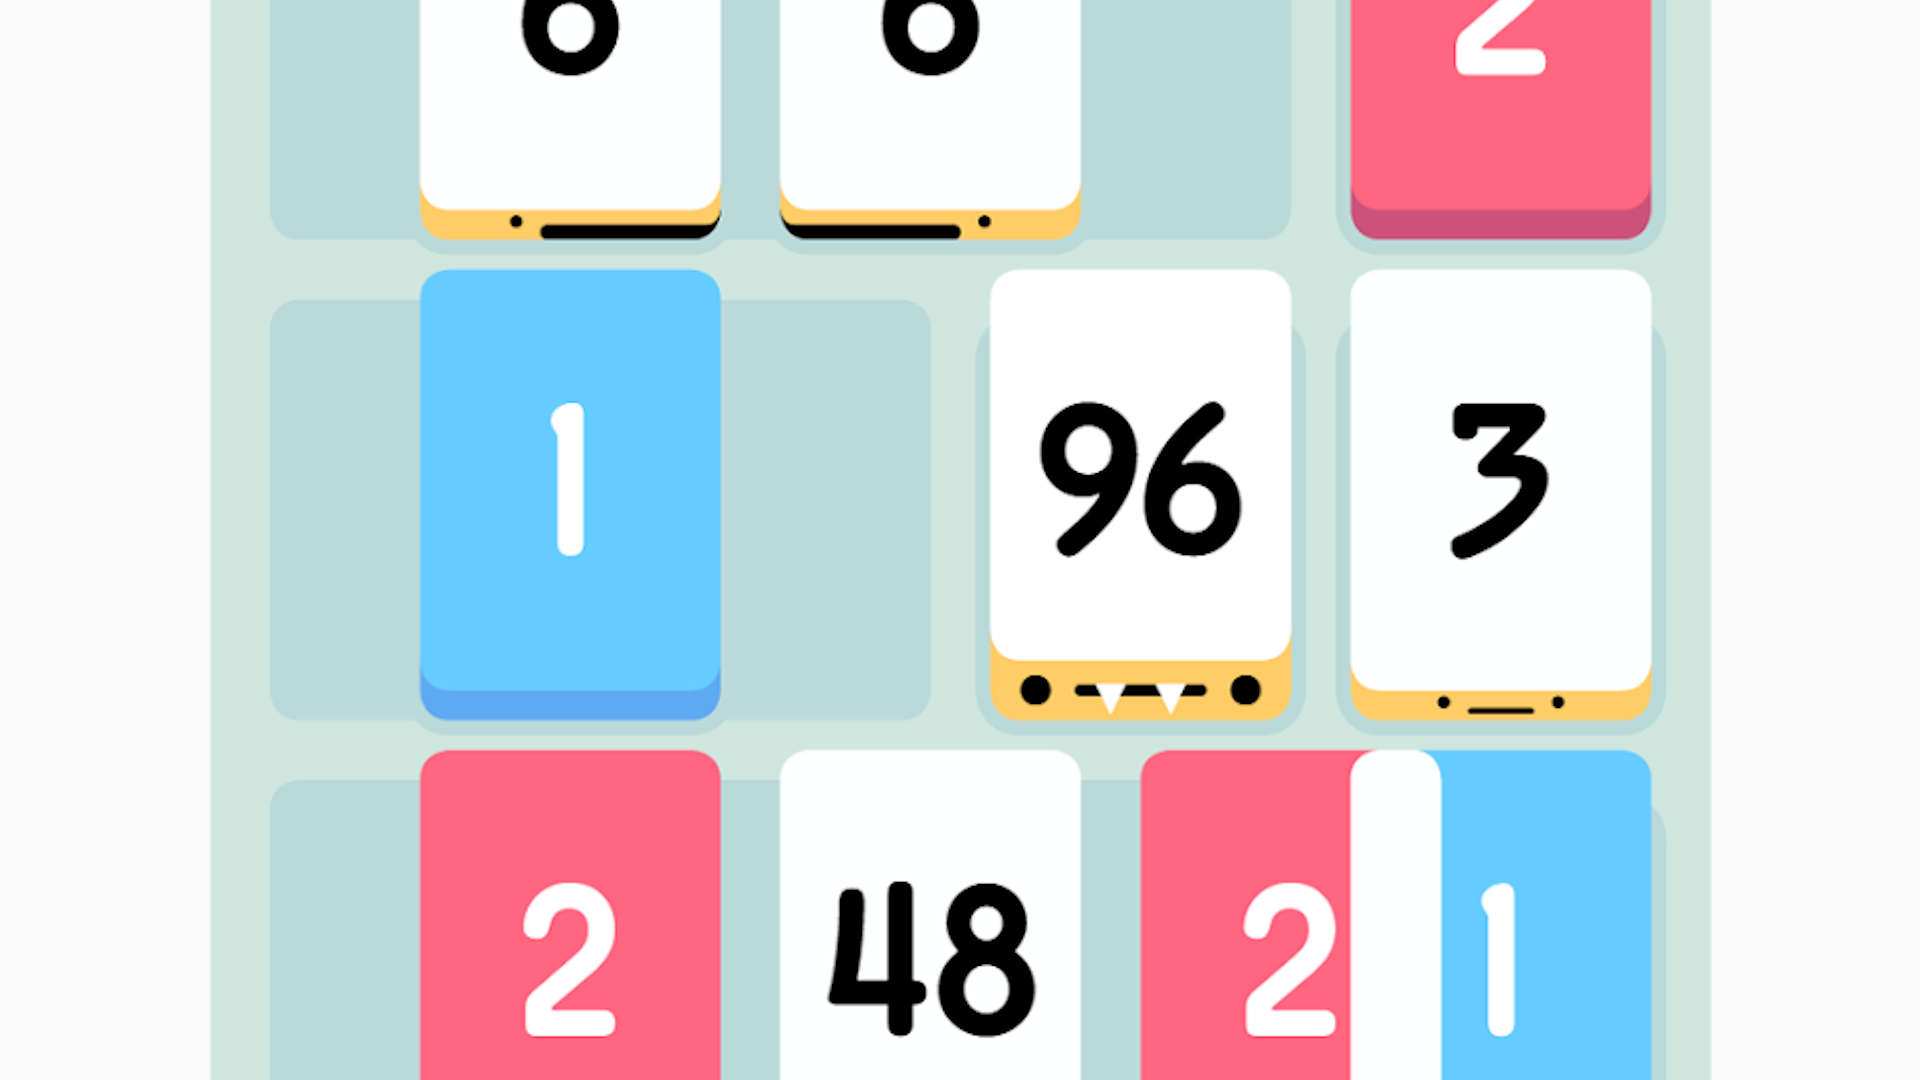 Best browser games: Threes! Image shows a number of tiles with numbers on them.